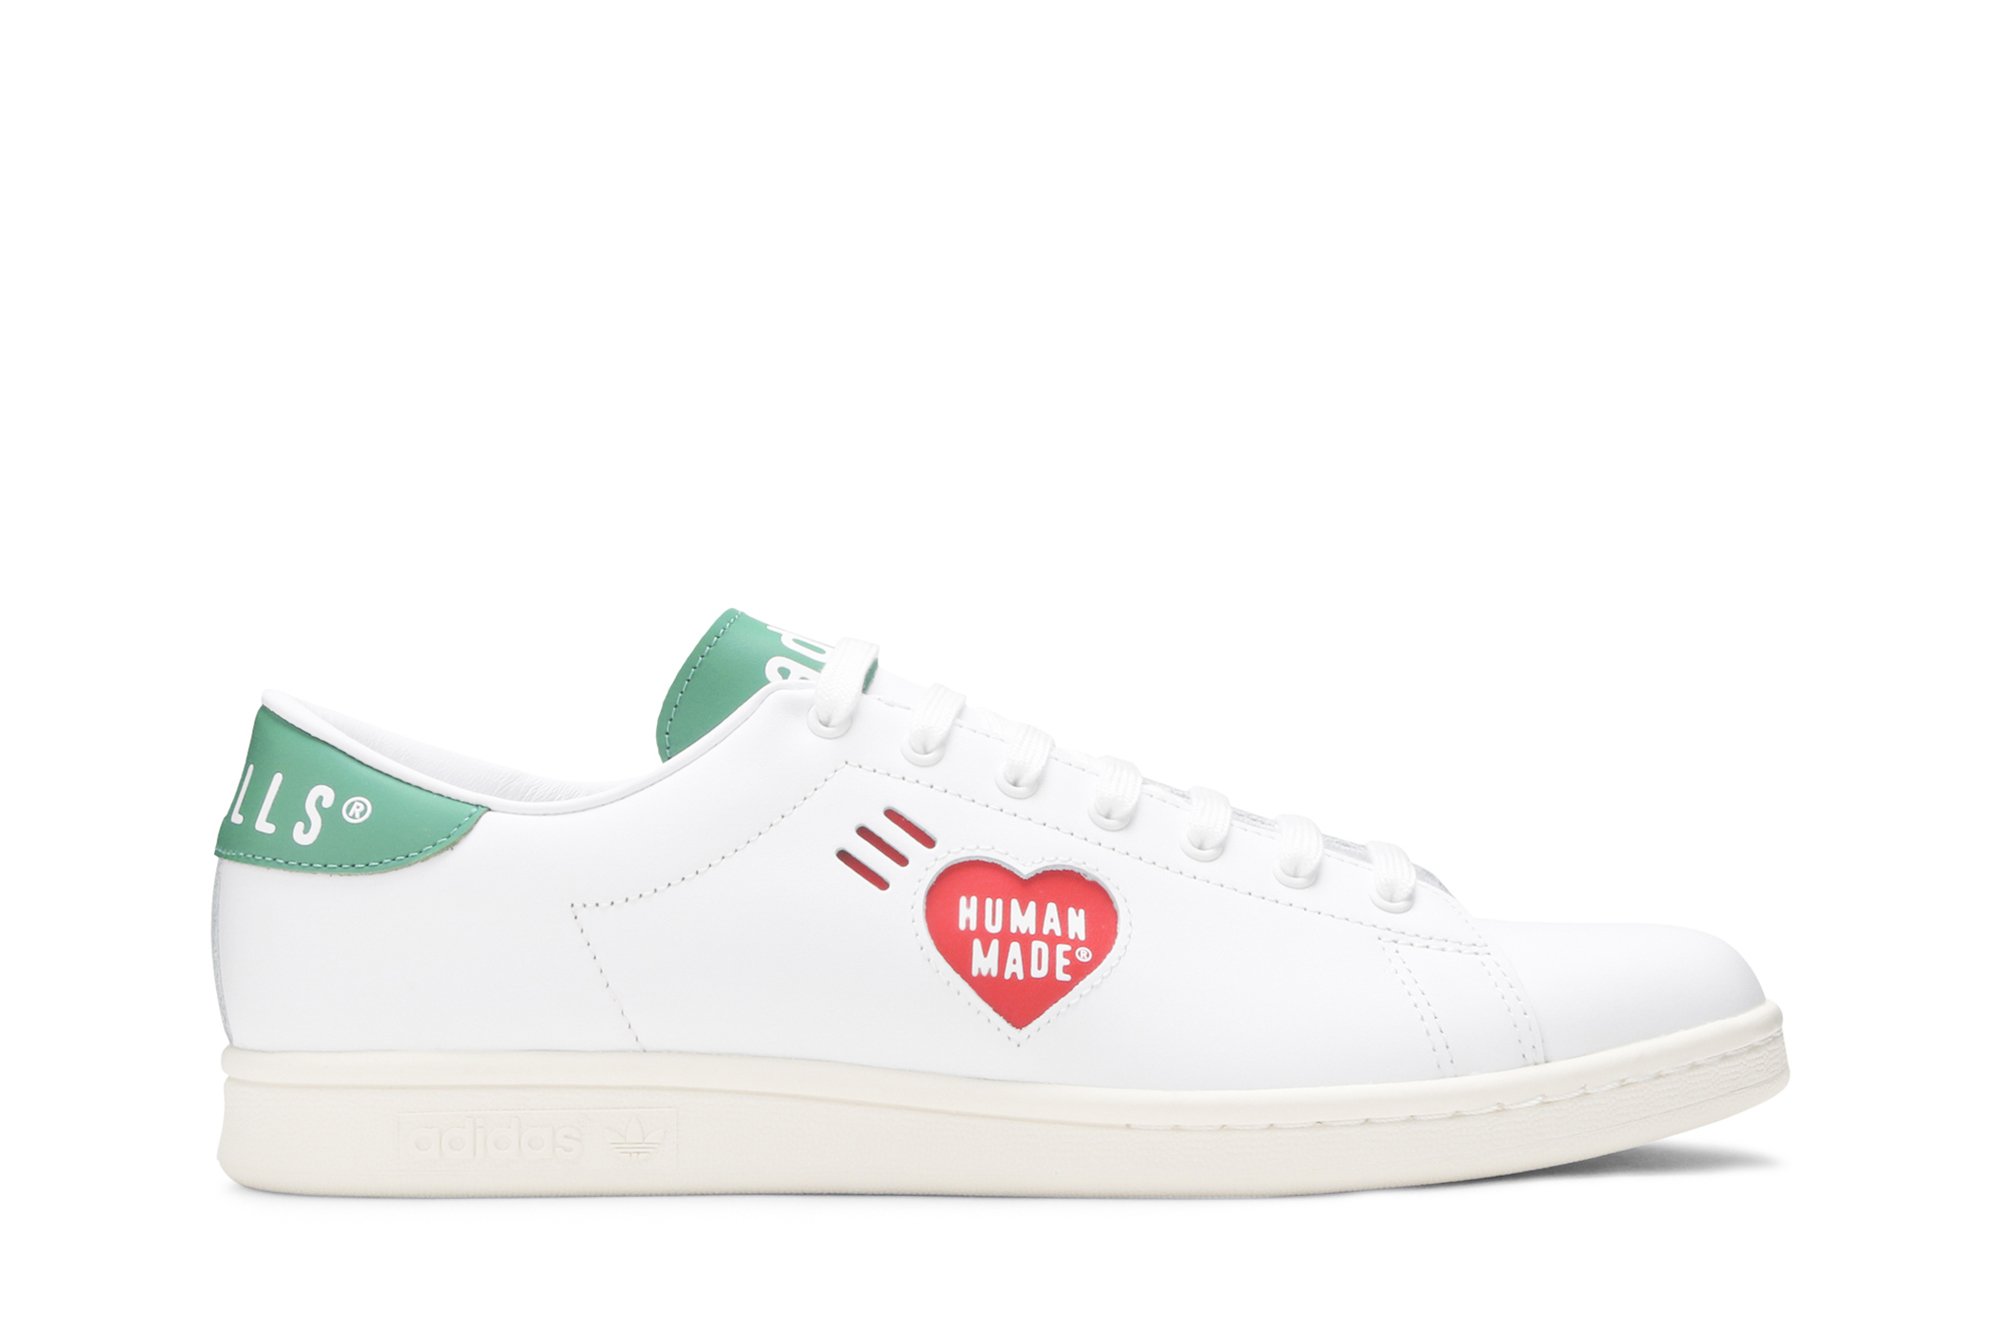 Buy Human Made x Stan Smith 'White Green' - FY0734 | GOAT